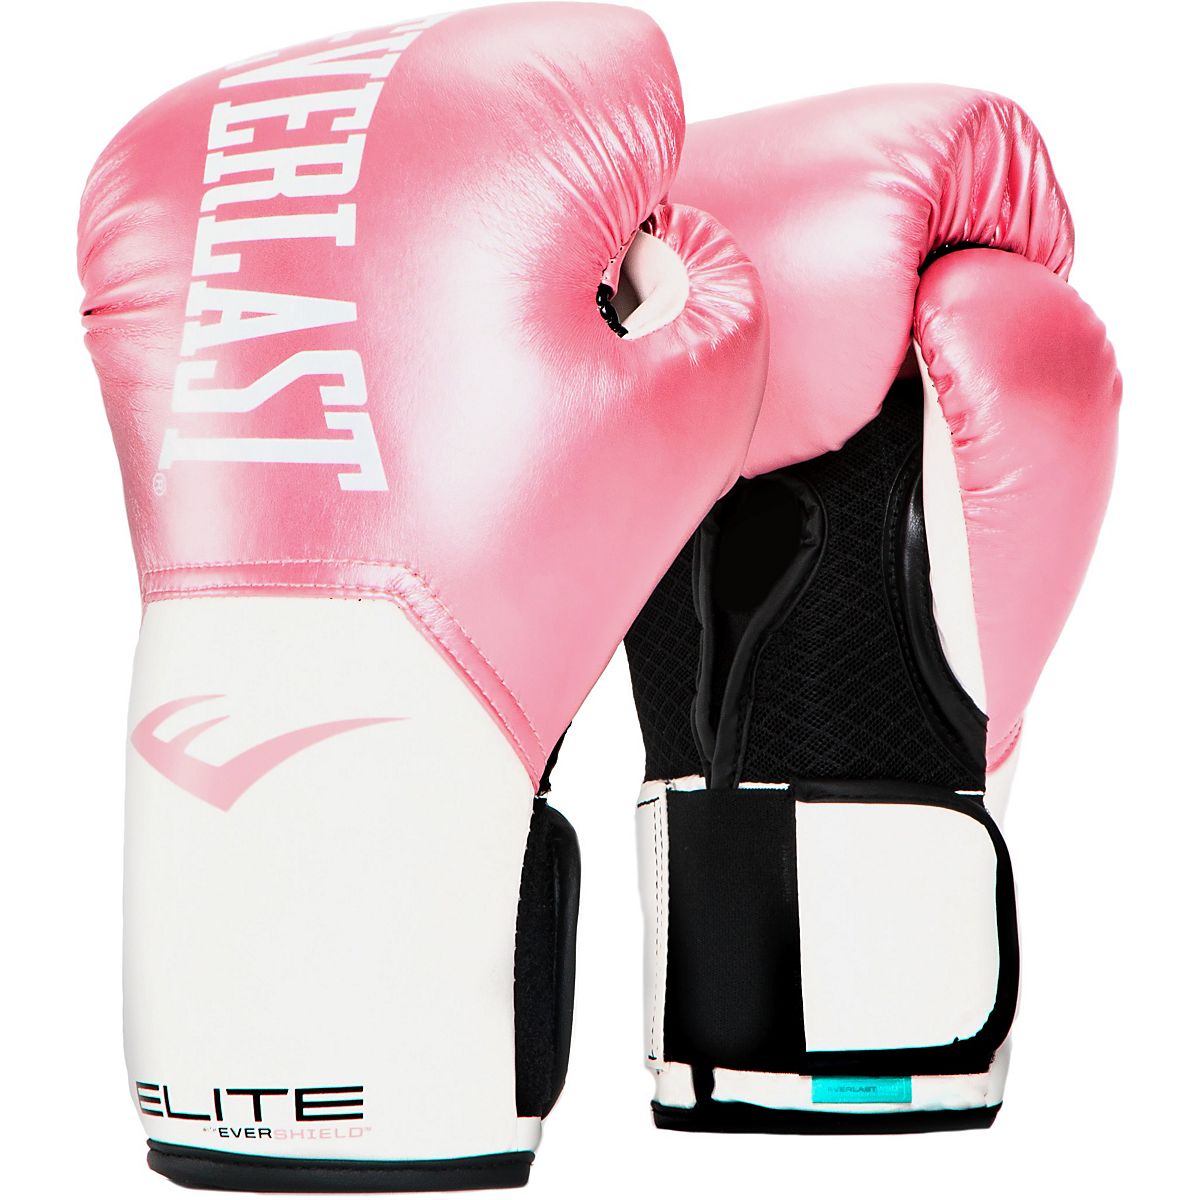 Everlast Pro Style 8 Ounce Youth Training Gloves Rc266 for sale online 